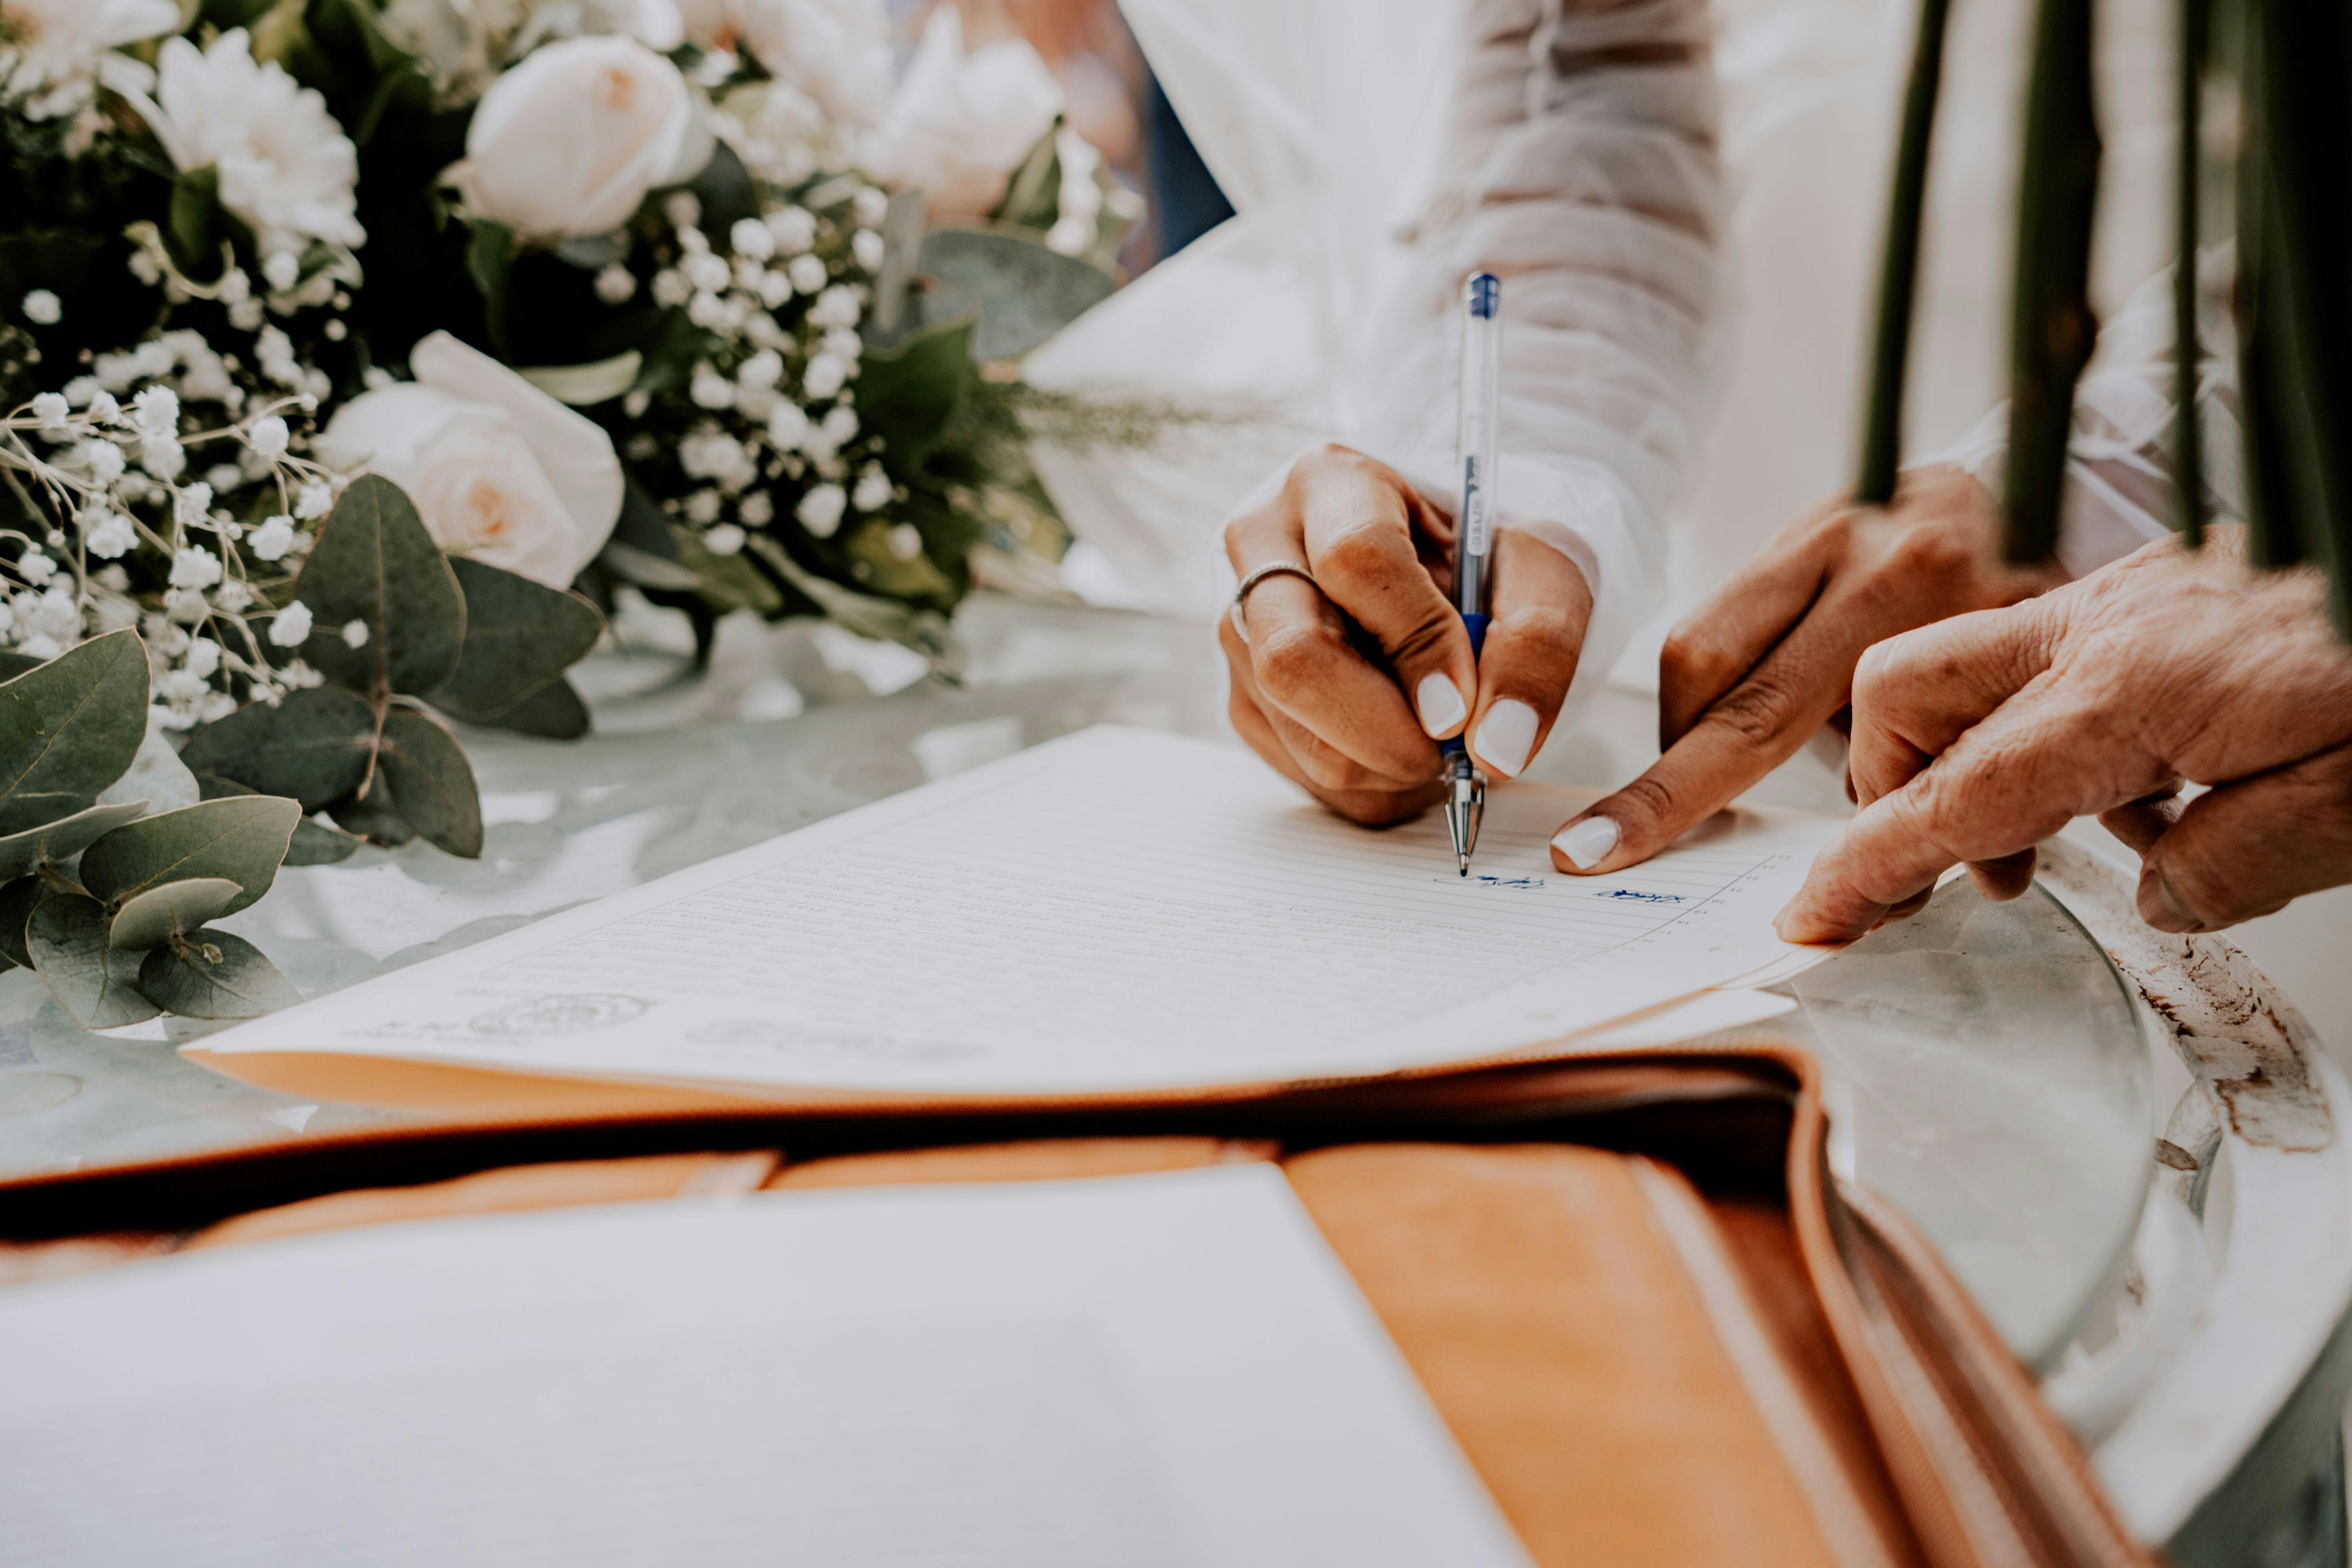 A hand signing a document | Source: Pexels